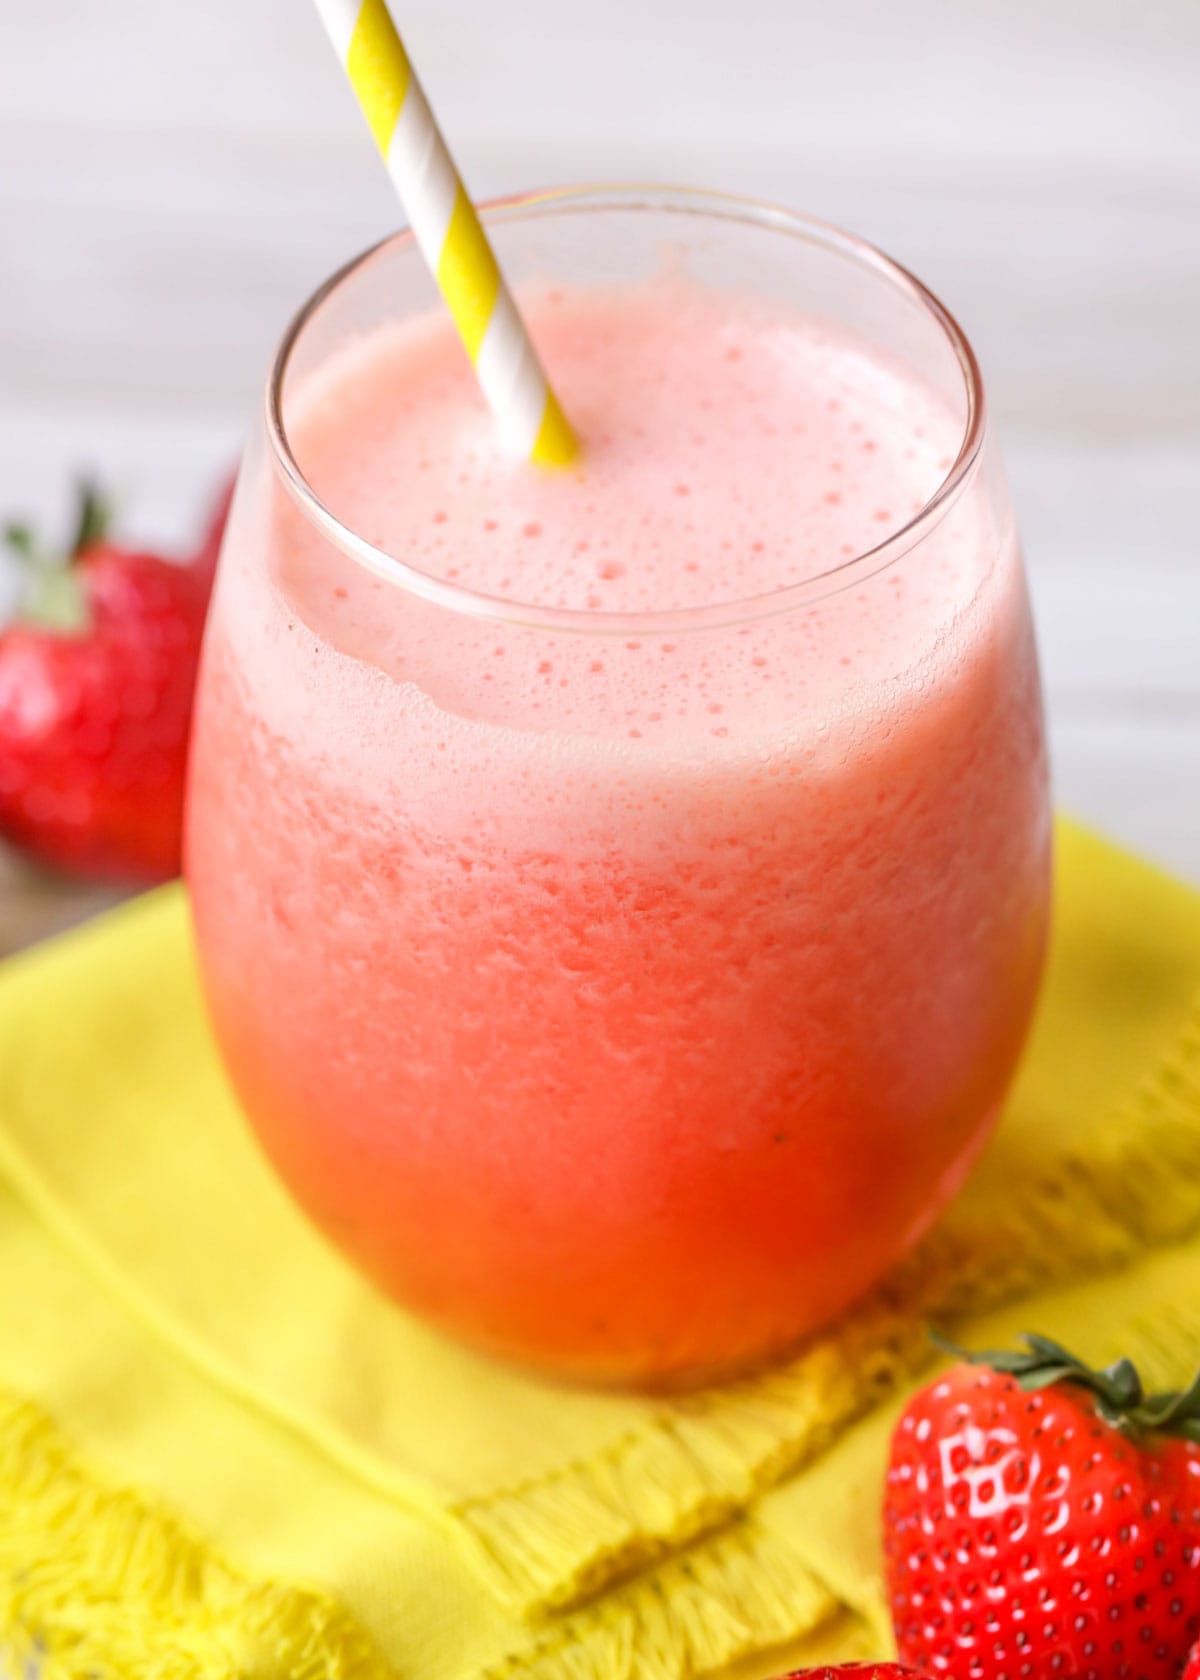 A glass full of frozen strawberry lemonade with a yellow straw.